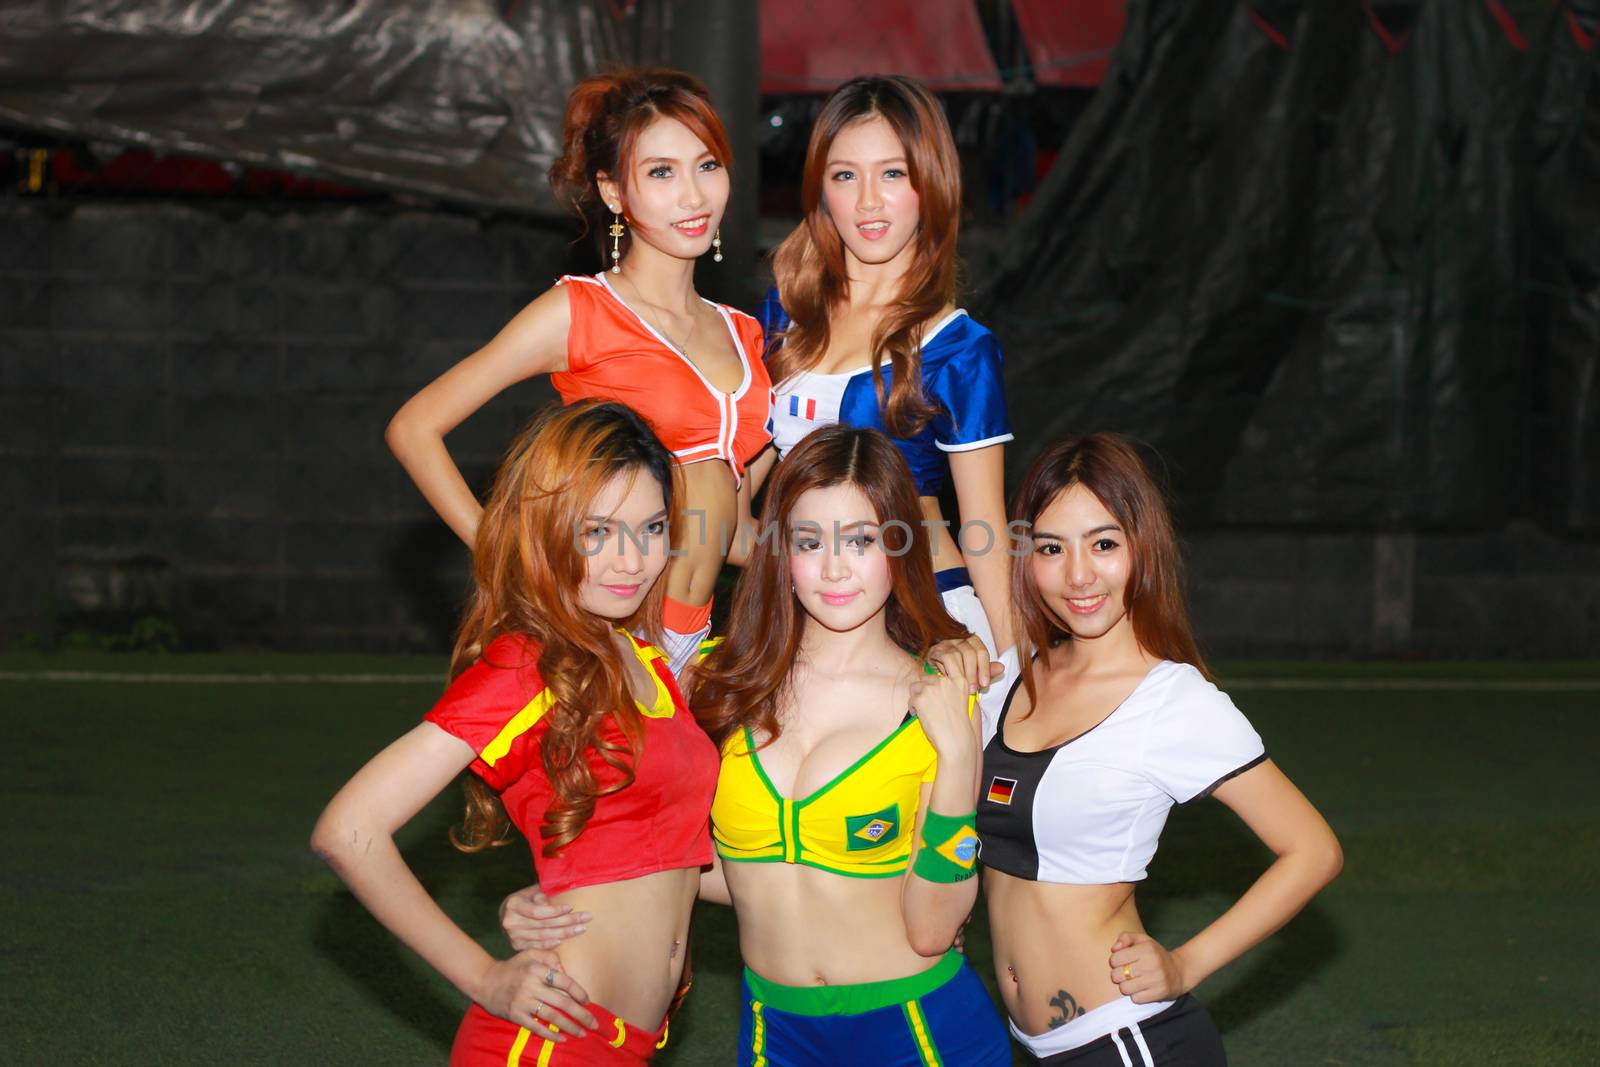 An Unidentified model  promote World cup 2014 by redthirteen